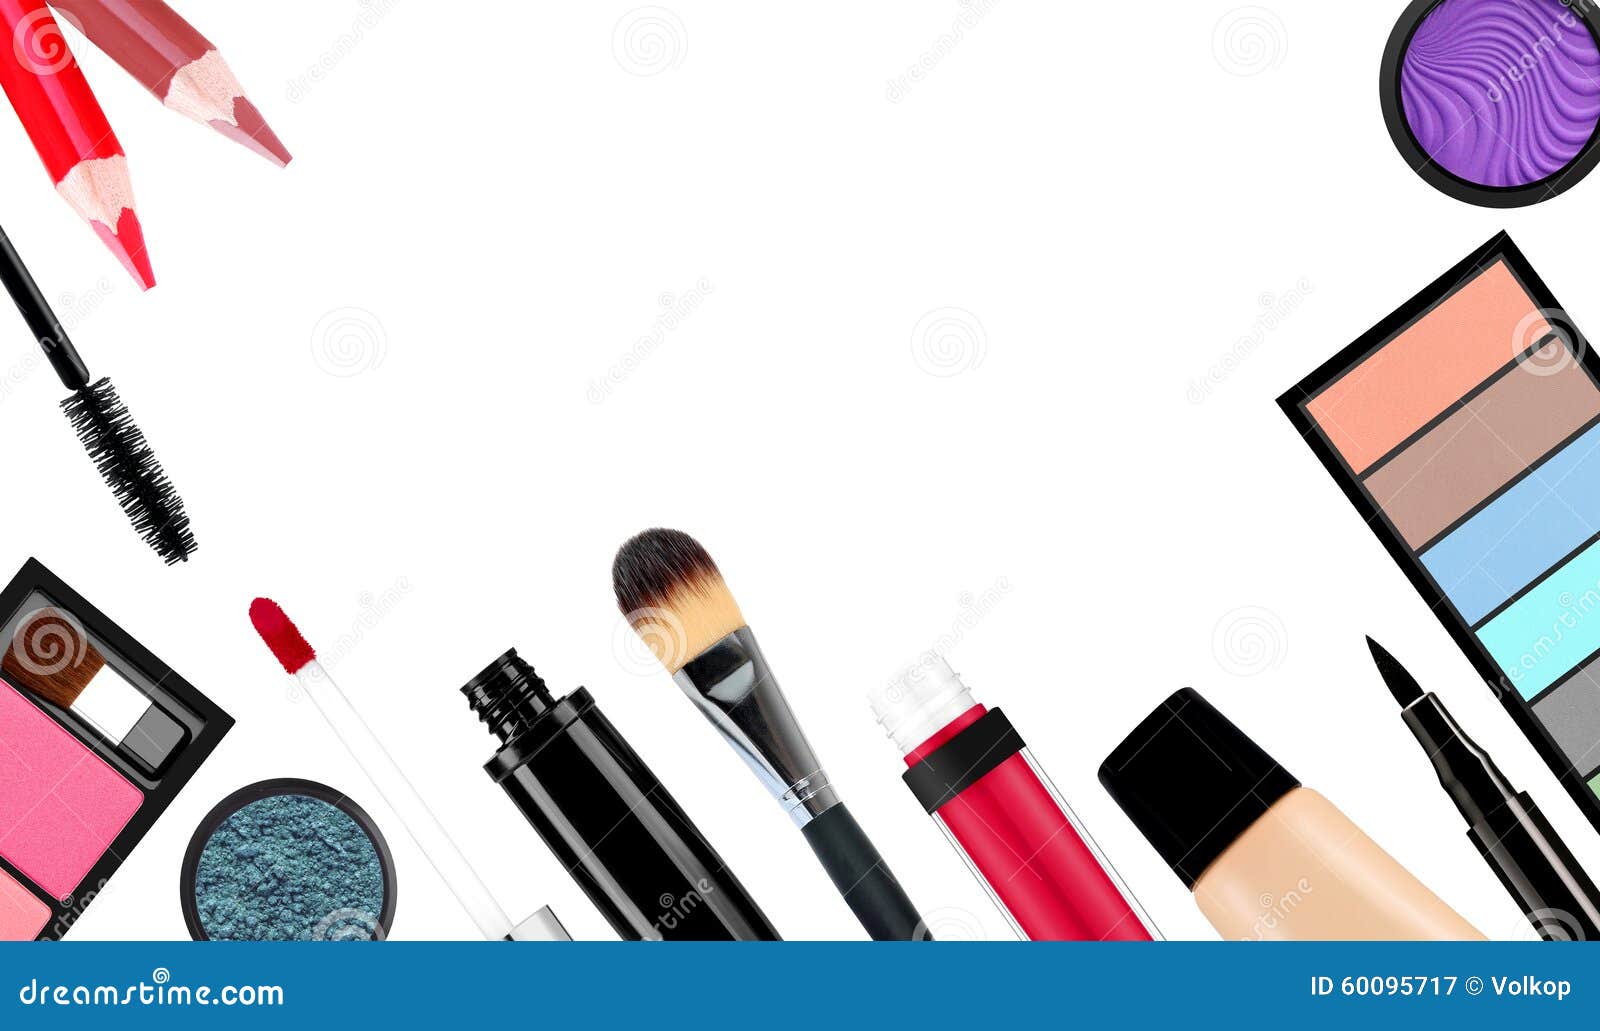 41,843 Makeup Brush Cosmetics White Background Stock Photos - Free &  Royalty-Free Stock Photos from Dreamstime